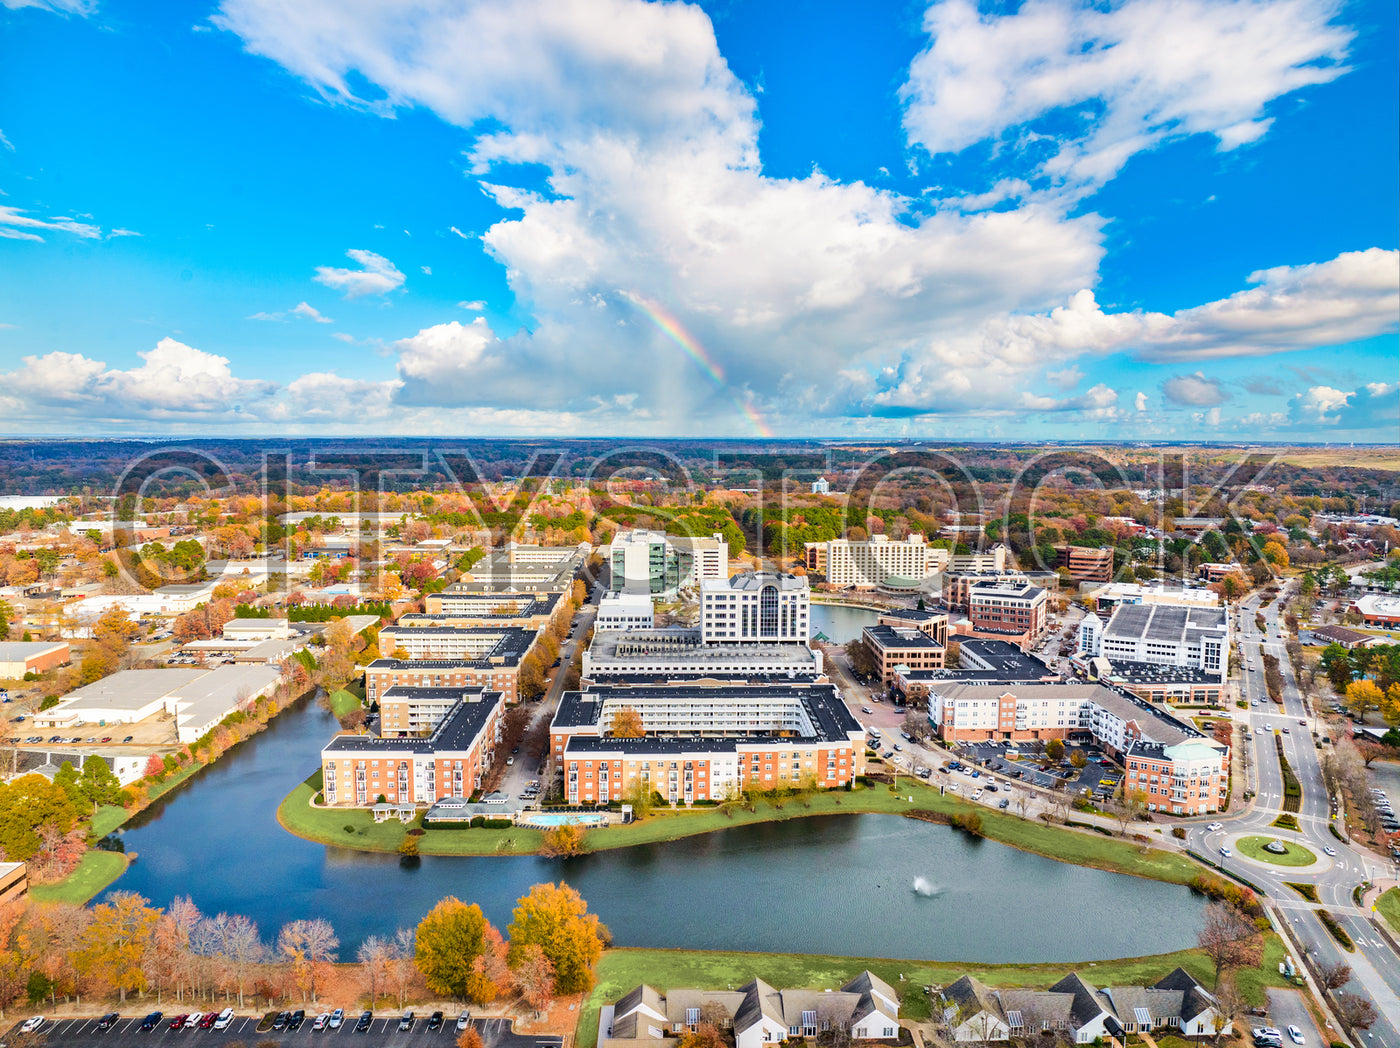 Aerial cityscape of Newport News with dynamic skies and water bodies